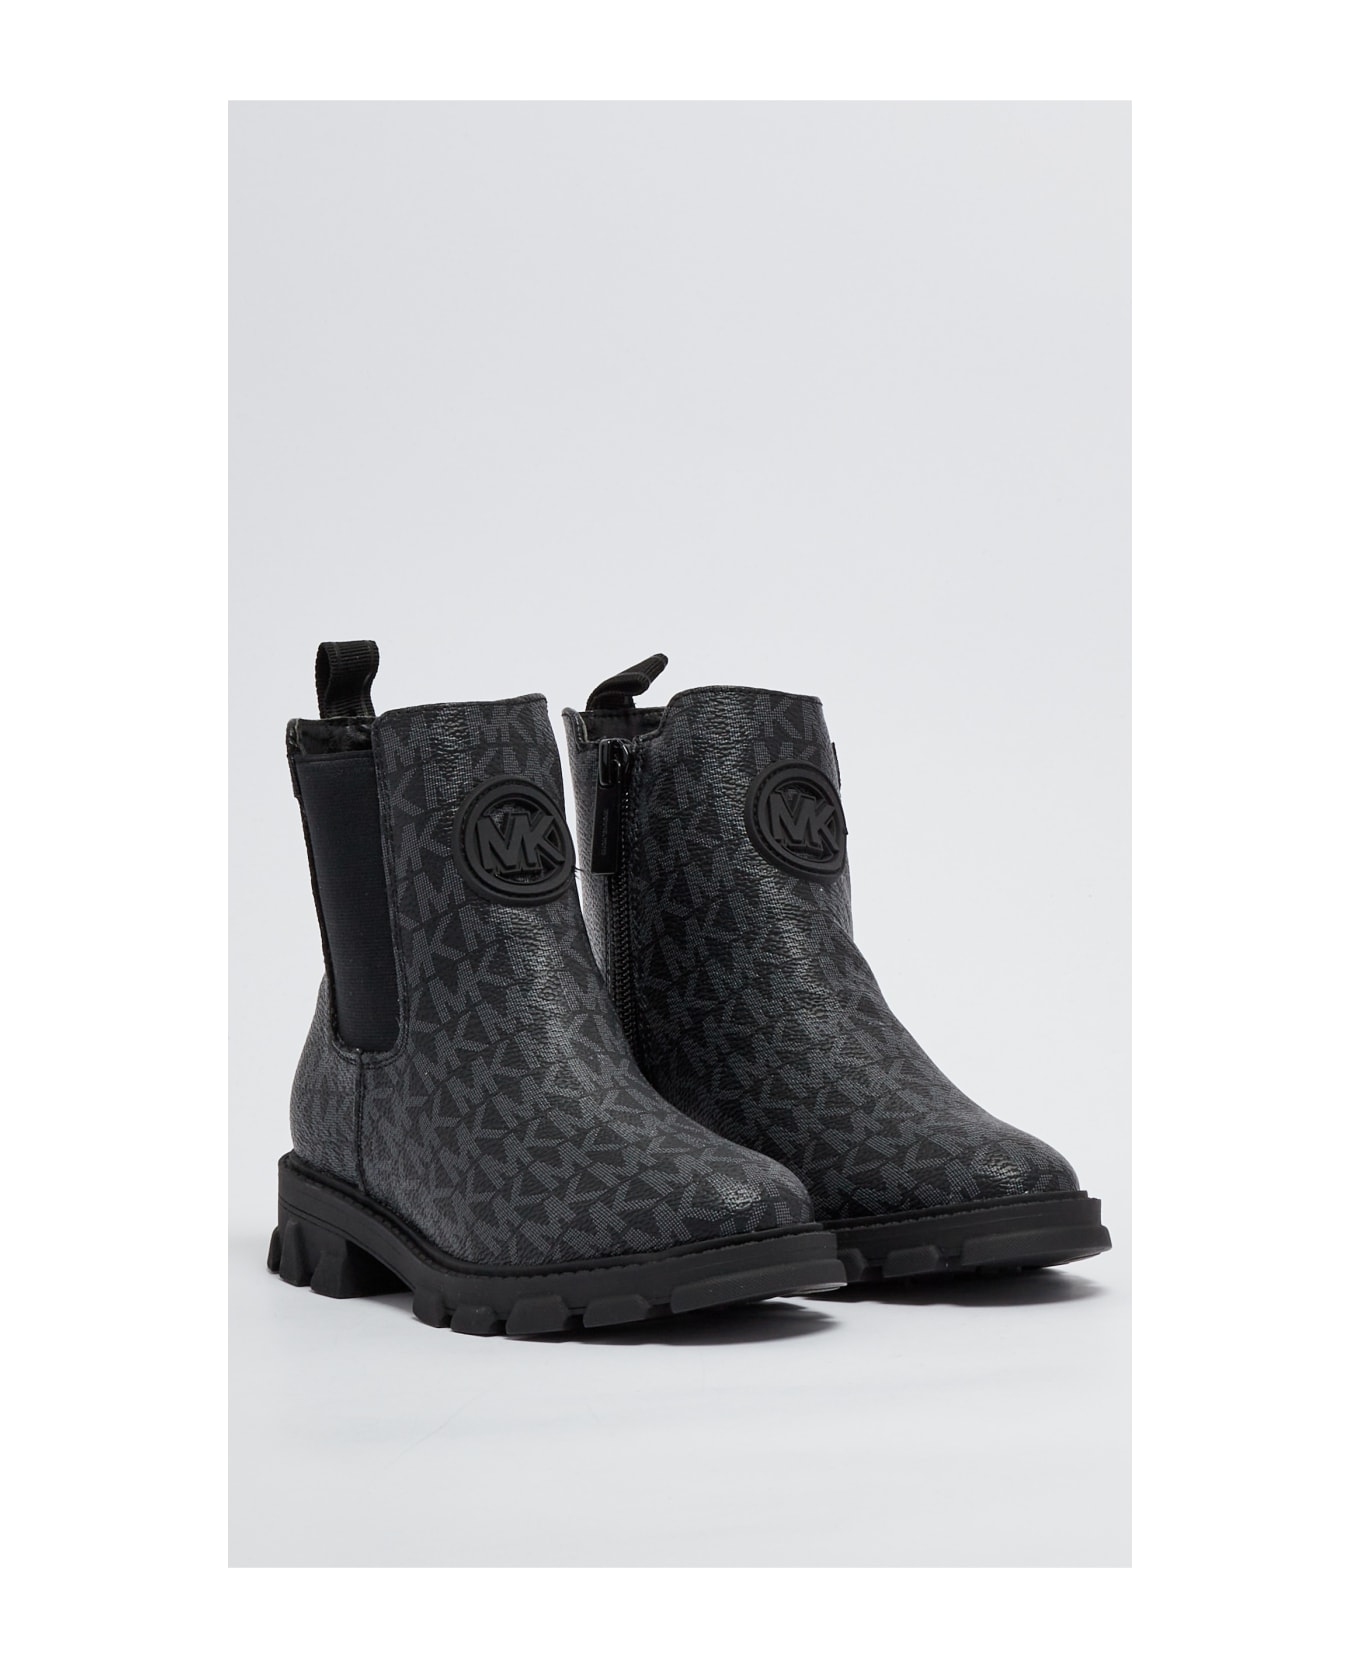 Michael Kors Ridley Chelsea Ankle Boots Boots - NERO